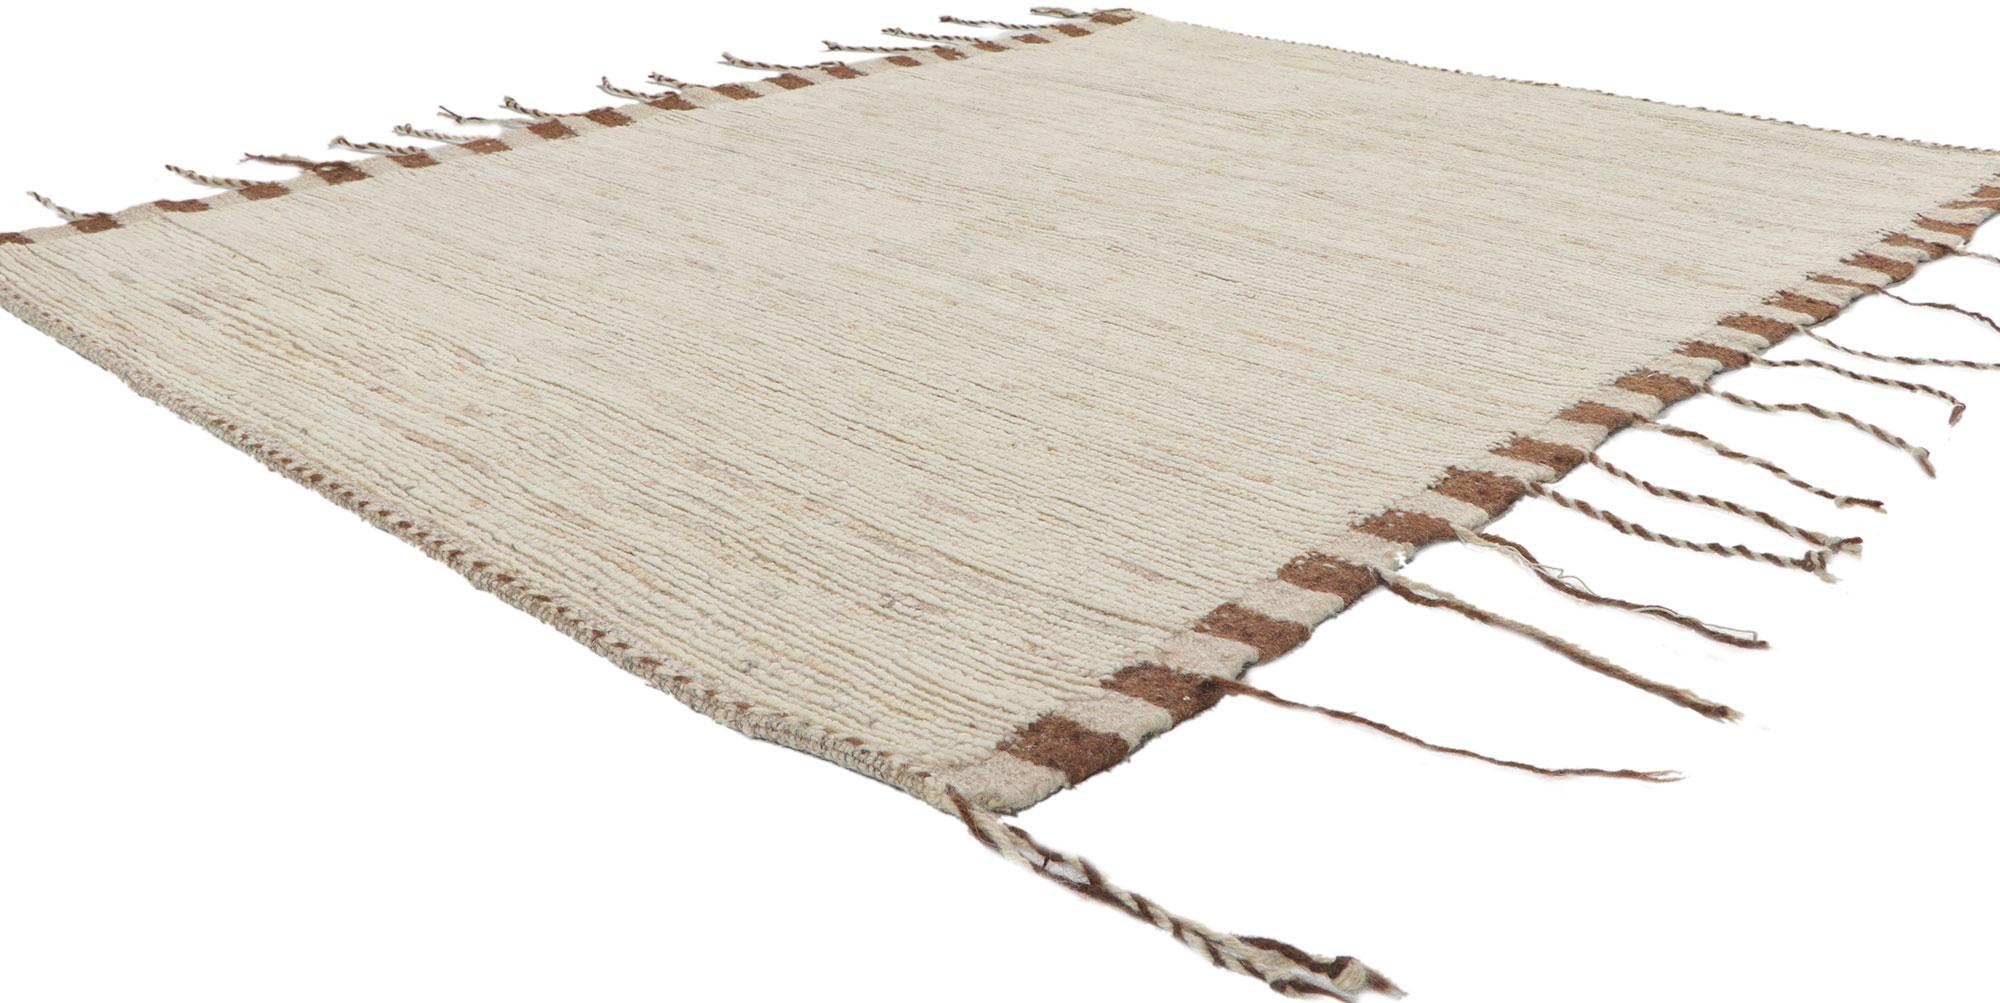 80781 New Contemporary Moroccan rug with Organic Modern Style, 05'00 x 06'06. Effortless beauty combined with simplicity and minimalist style, this hand-knotted wool contemporary Moroccan area rug provides a feeling of cozy contentment without the